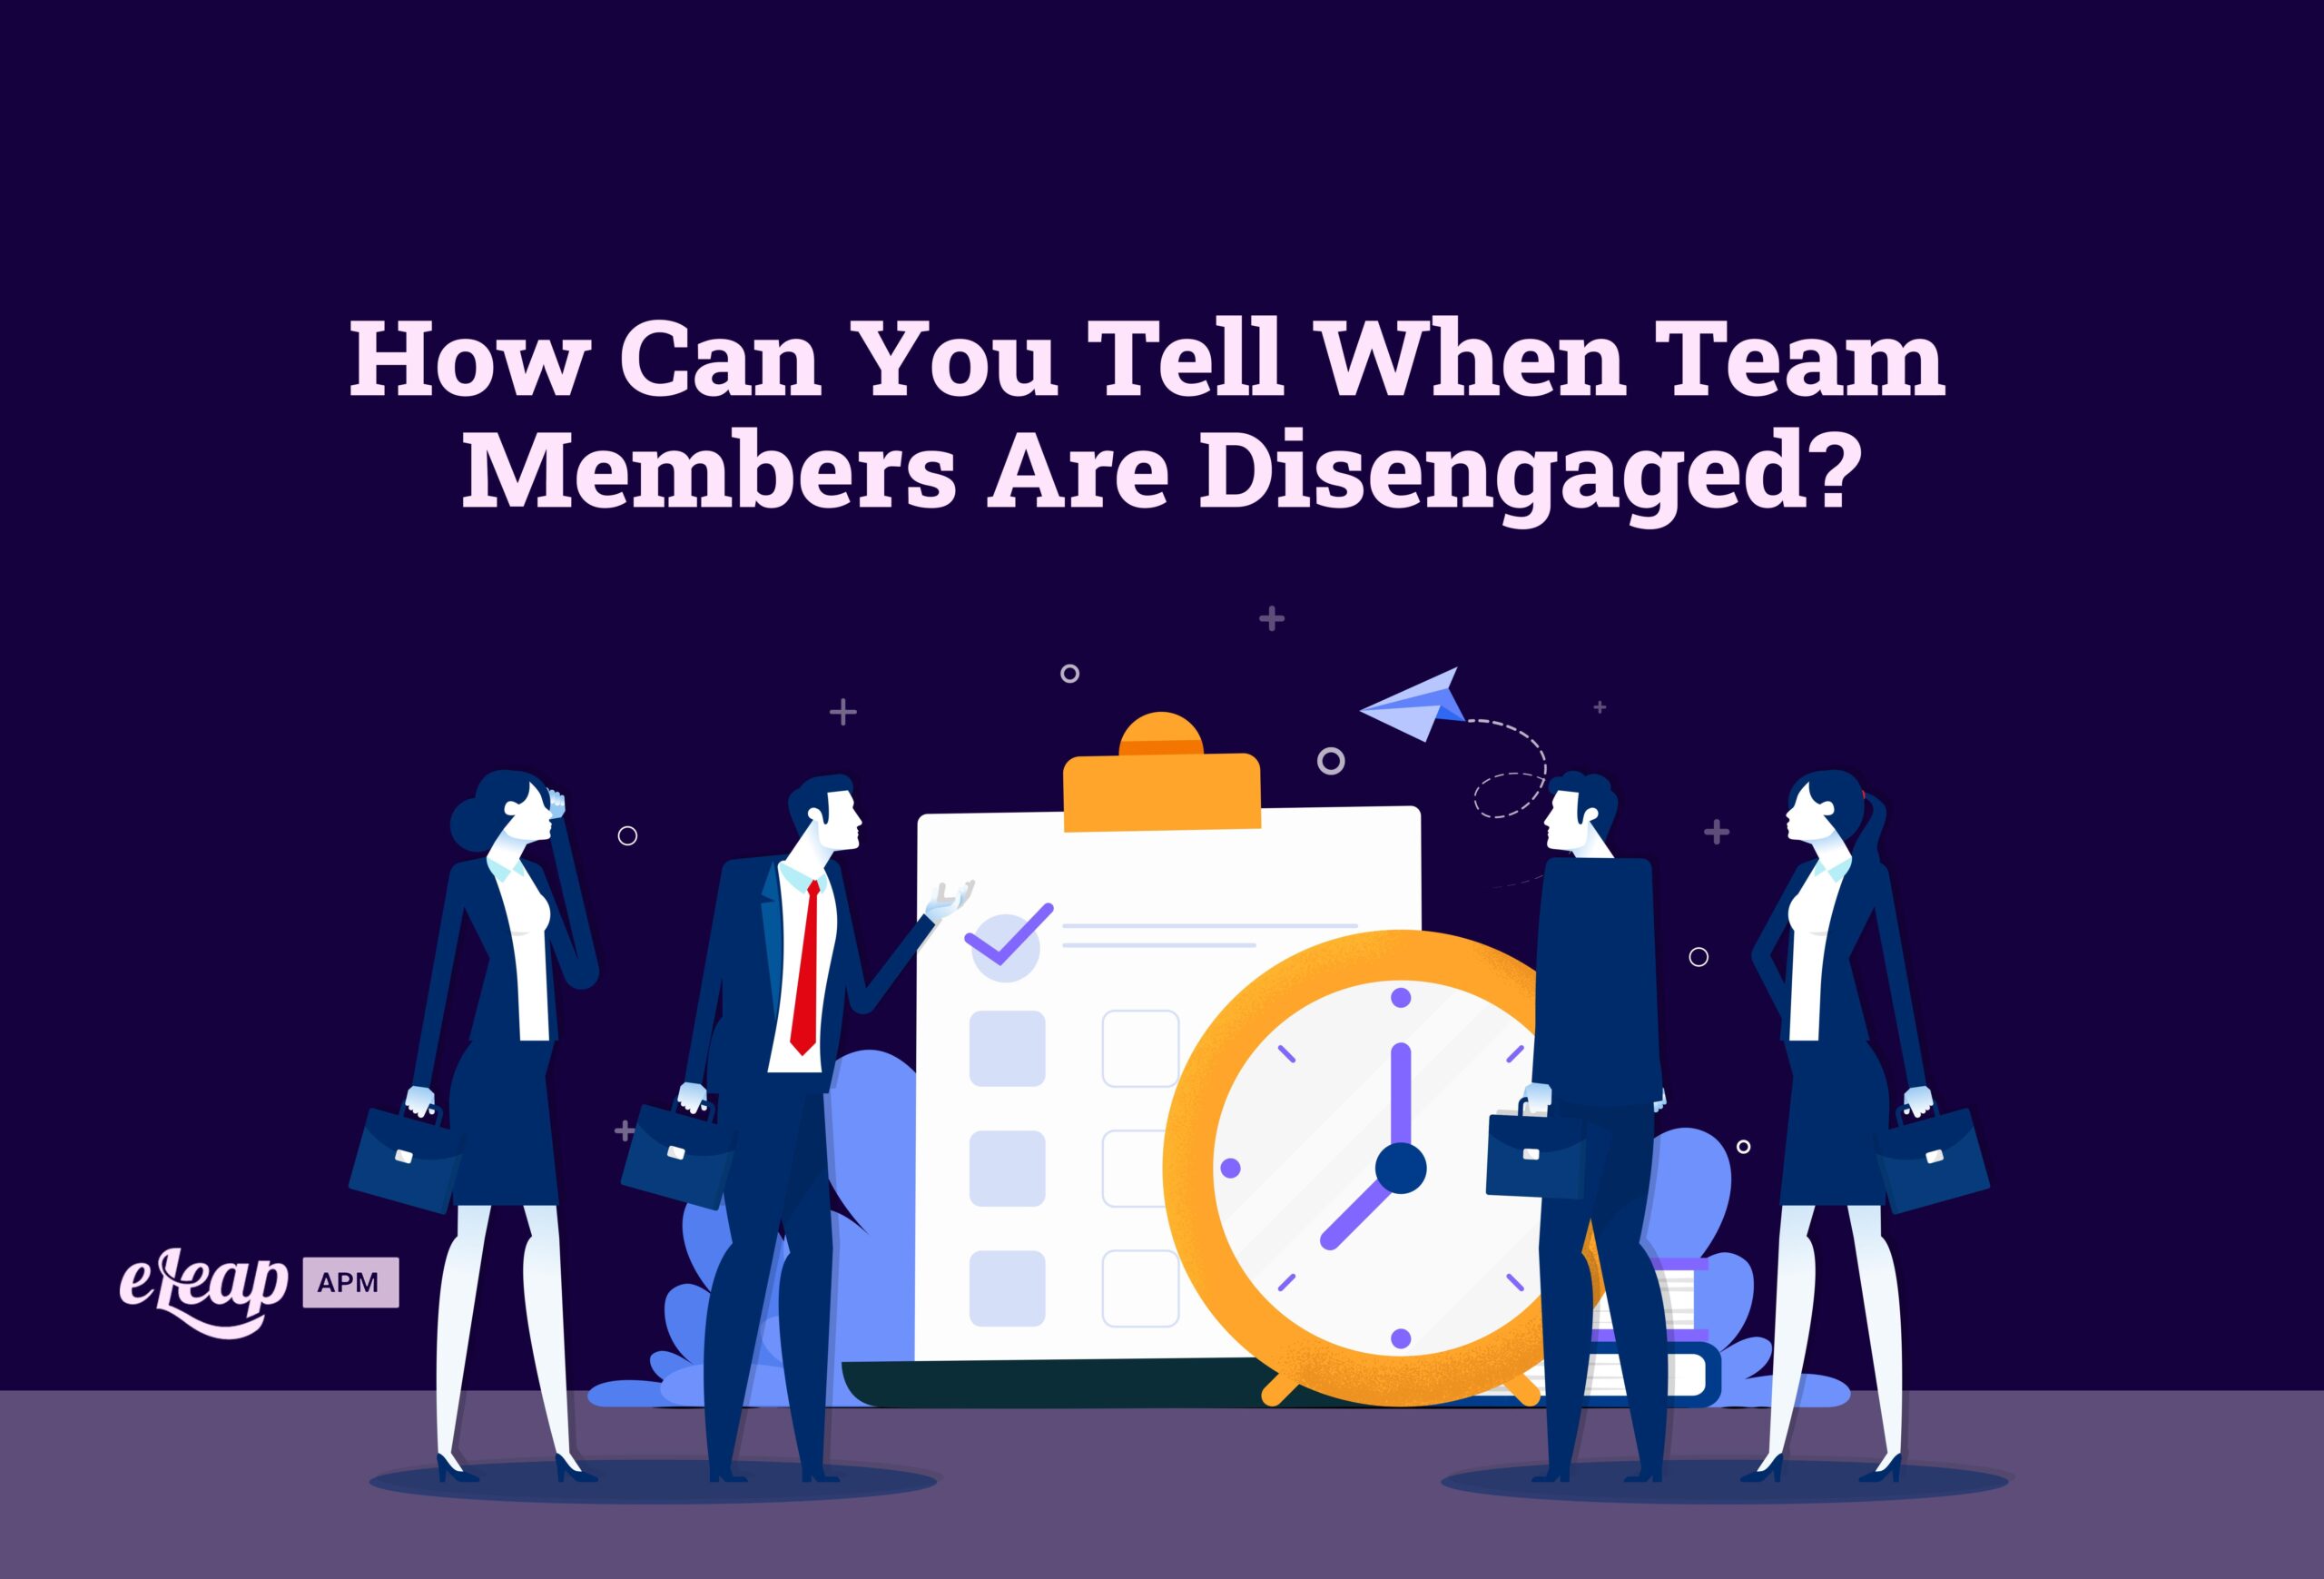 How Can You Tell When Team Members Are Disengaged?